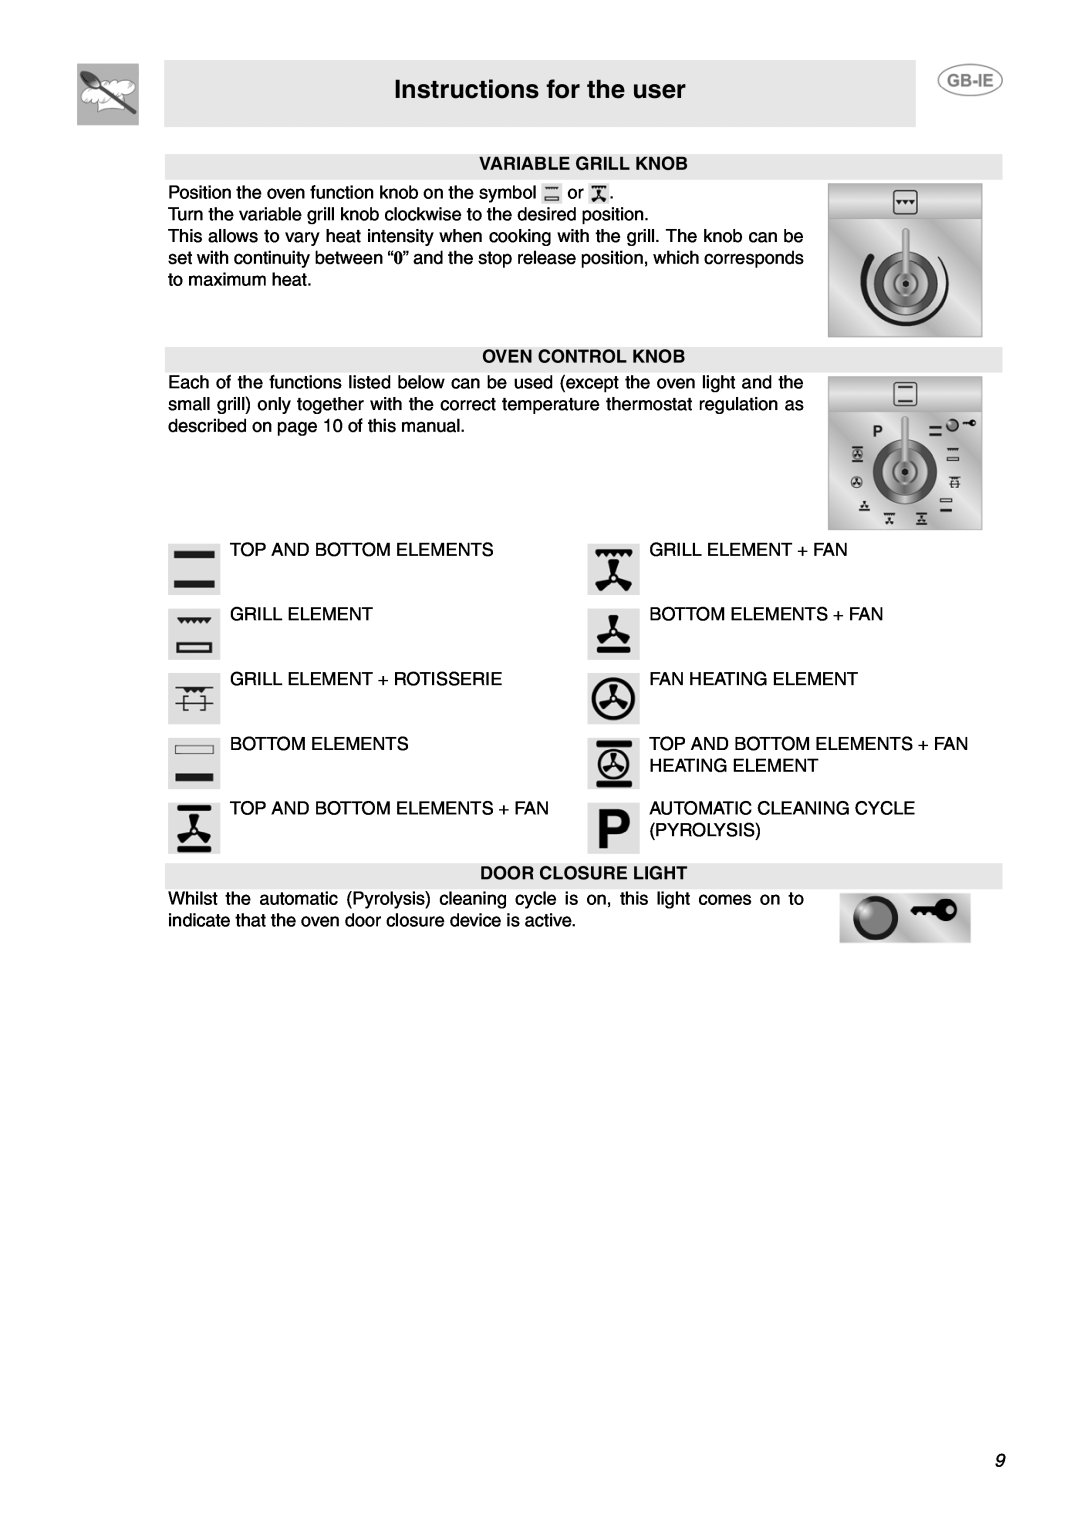 Smeg SUK61CPX5 manual Instructions for the user, Variable Grill Knob, Oven Control Knob, Door Closure Light 